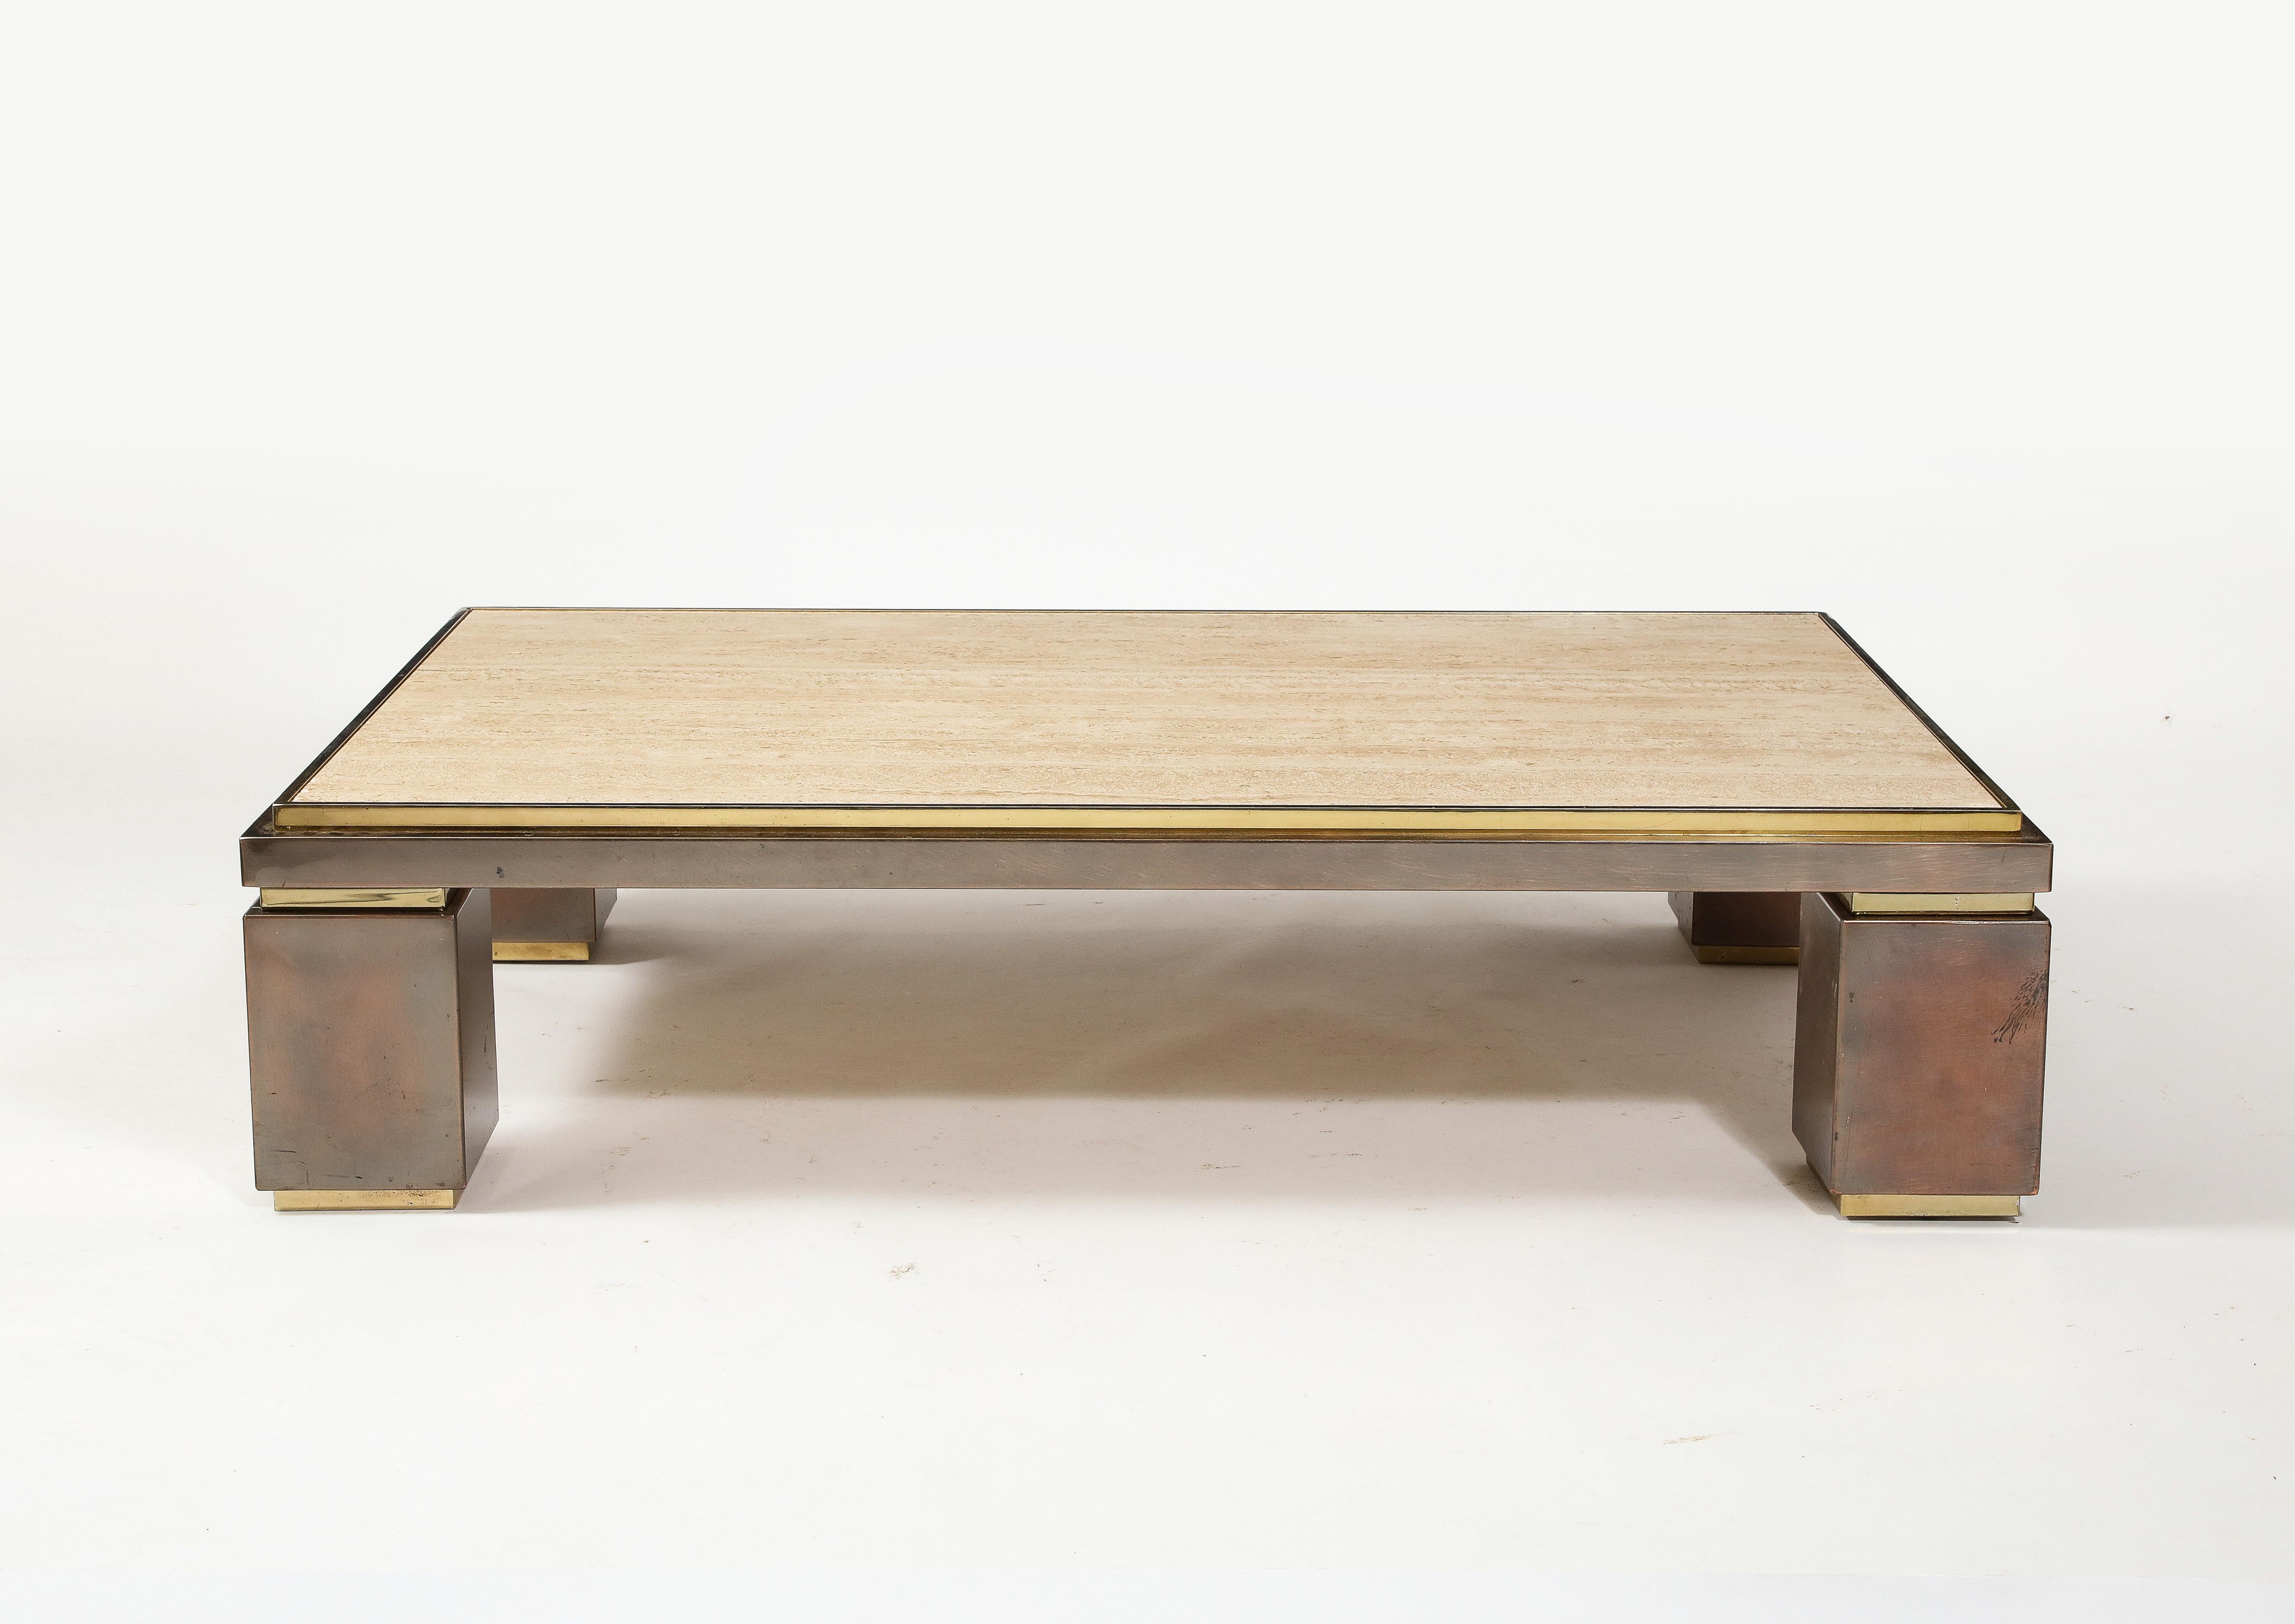 Large Deco Style BelgoChrom Travertine & Brass Coffee Table, Belgium 1960's For Sale 4